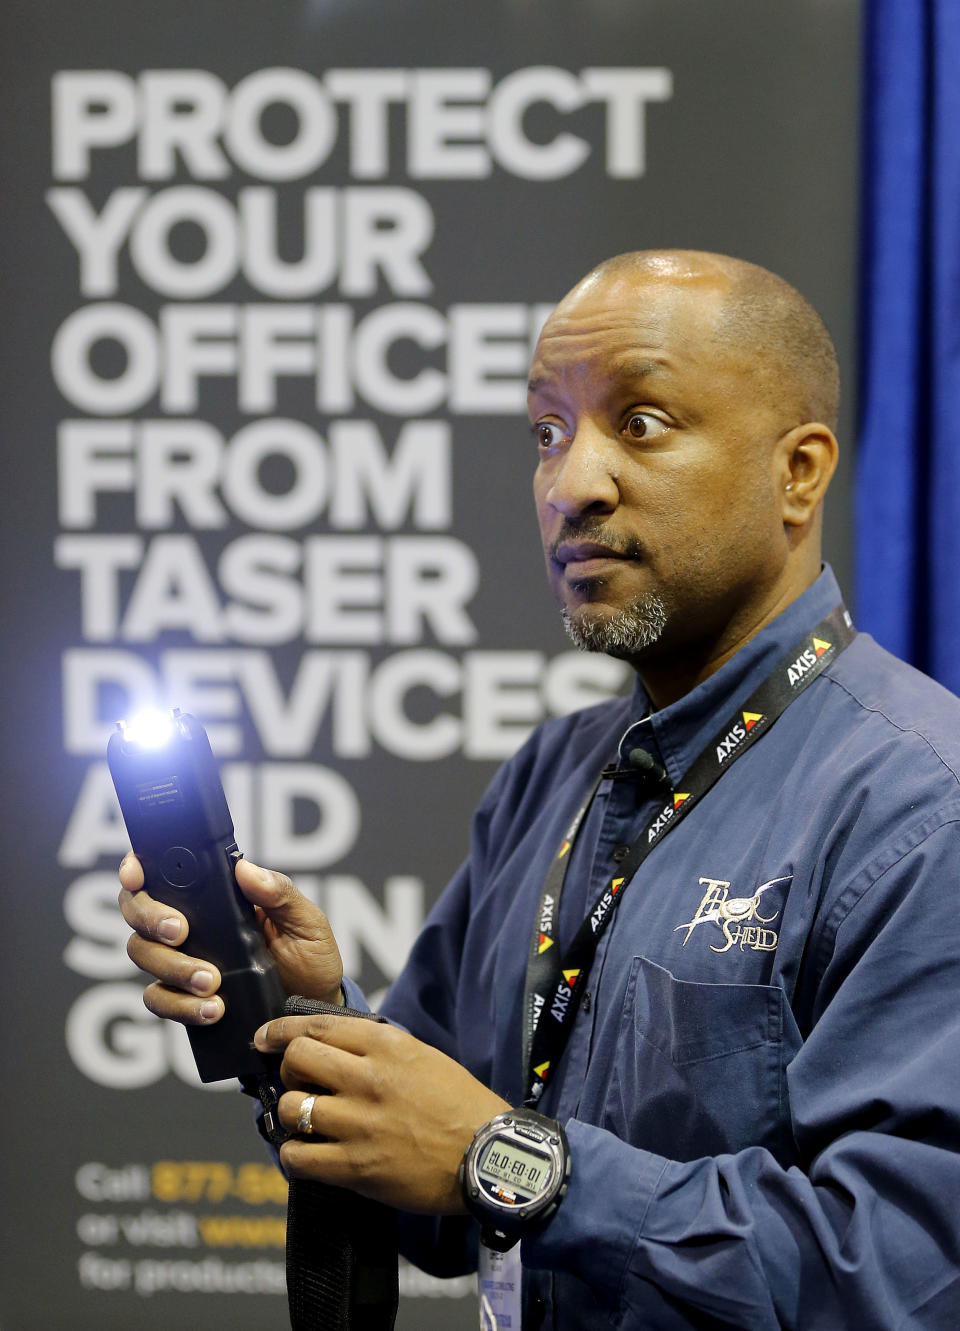 Gregory Williams, of G Squared Consulting, demonstrates an Electroshock weapon at the 8th annual Border Security Expo, Tuesday, March 18, 2014 in Phoenix. The two day event will feature panel discussions, sharing intelligence, and exhibitors displaying high-tech wares aimed at securing lucrative government contracts and private sales. G Squared Consulting creates clothing that is resistant to Electroshock weapons. (AP Photo/Matt York)